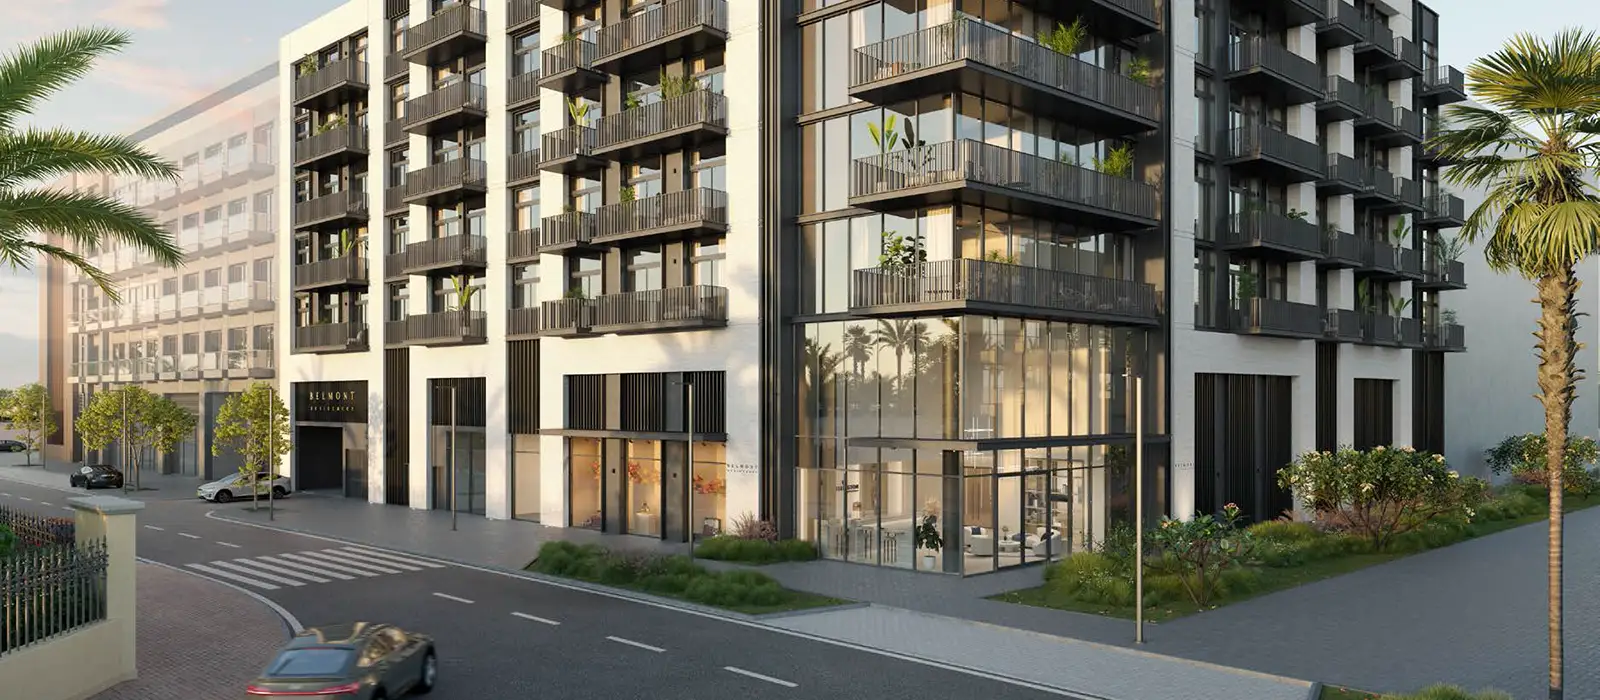 Luxury Apartments at Belmont Residences